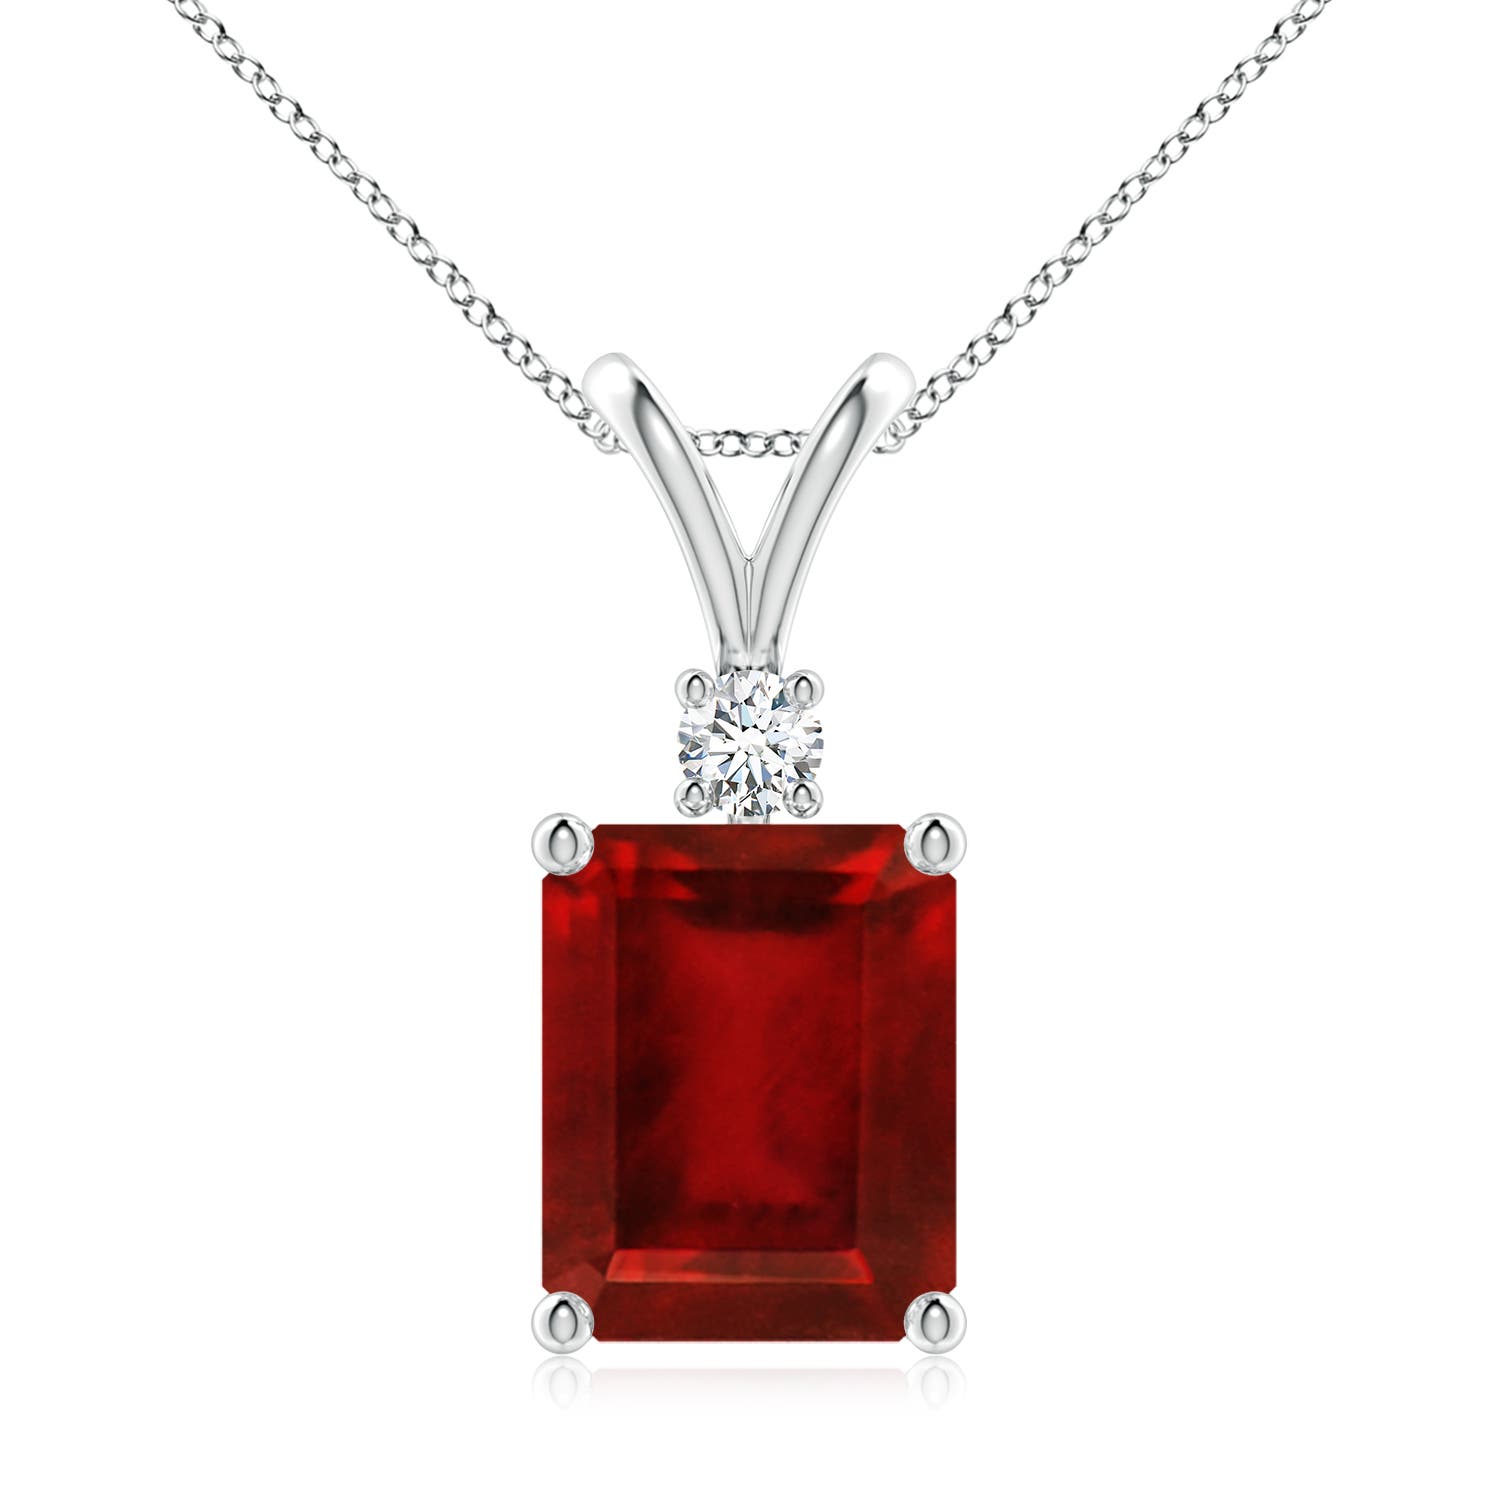 AAAA - Ruby / 4.11 CT / 14 KT White Gold